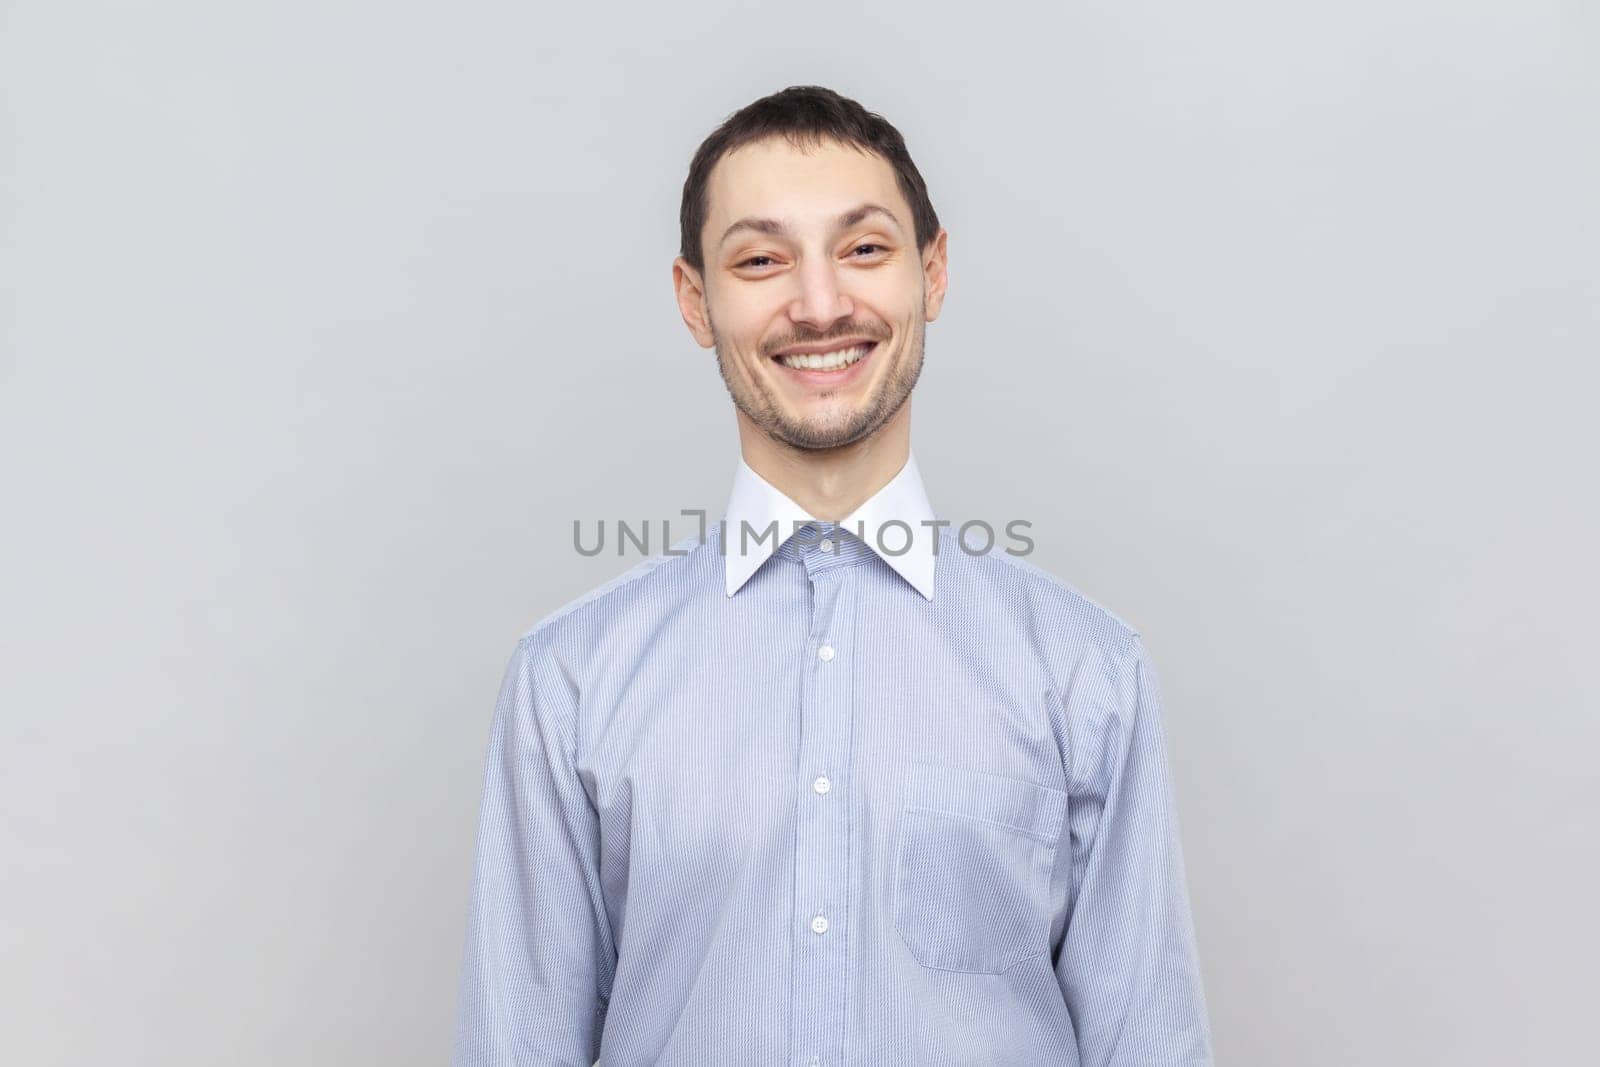 Portrait of handsome smiling joyful man standing looking at camera with toothy smile, expressing happiness, wearing light blue shirt. Indoor studio shot isolated on gray background.